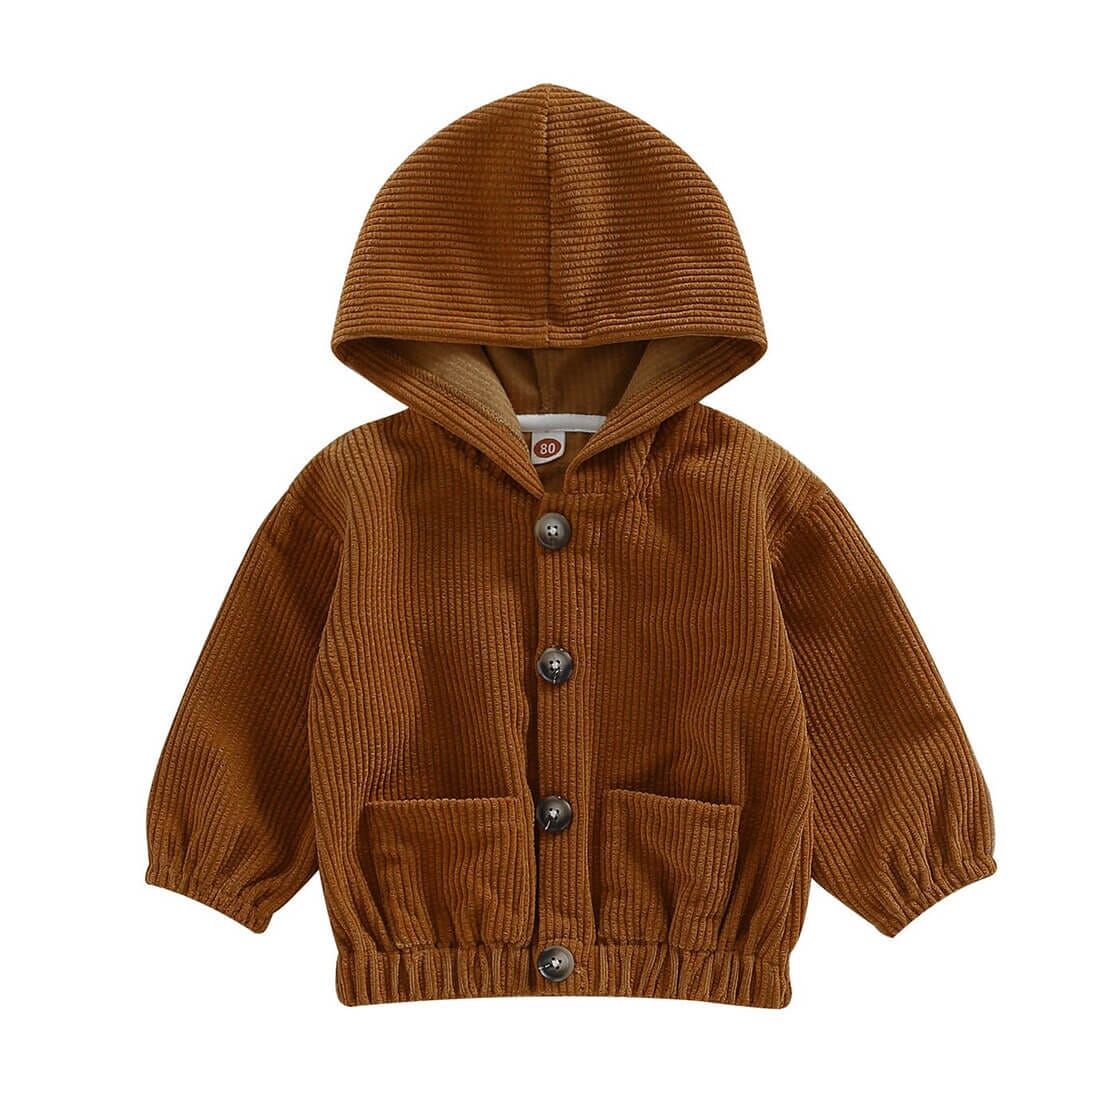 Solid Corduroy Hooded Toddler Jacket Jacket The Trendy Toddlers Brown 9-12 M 